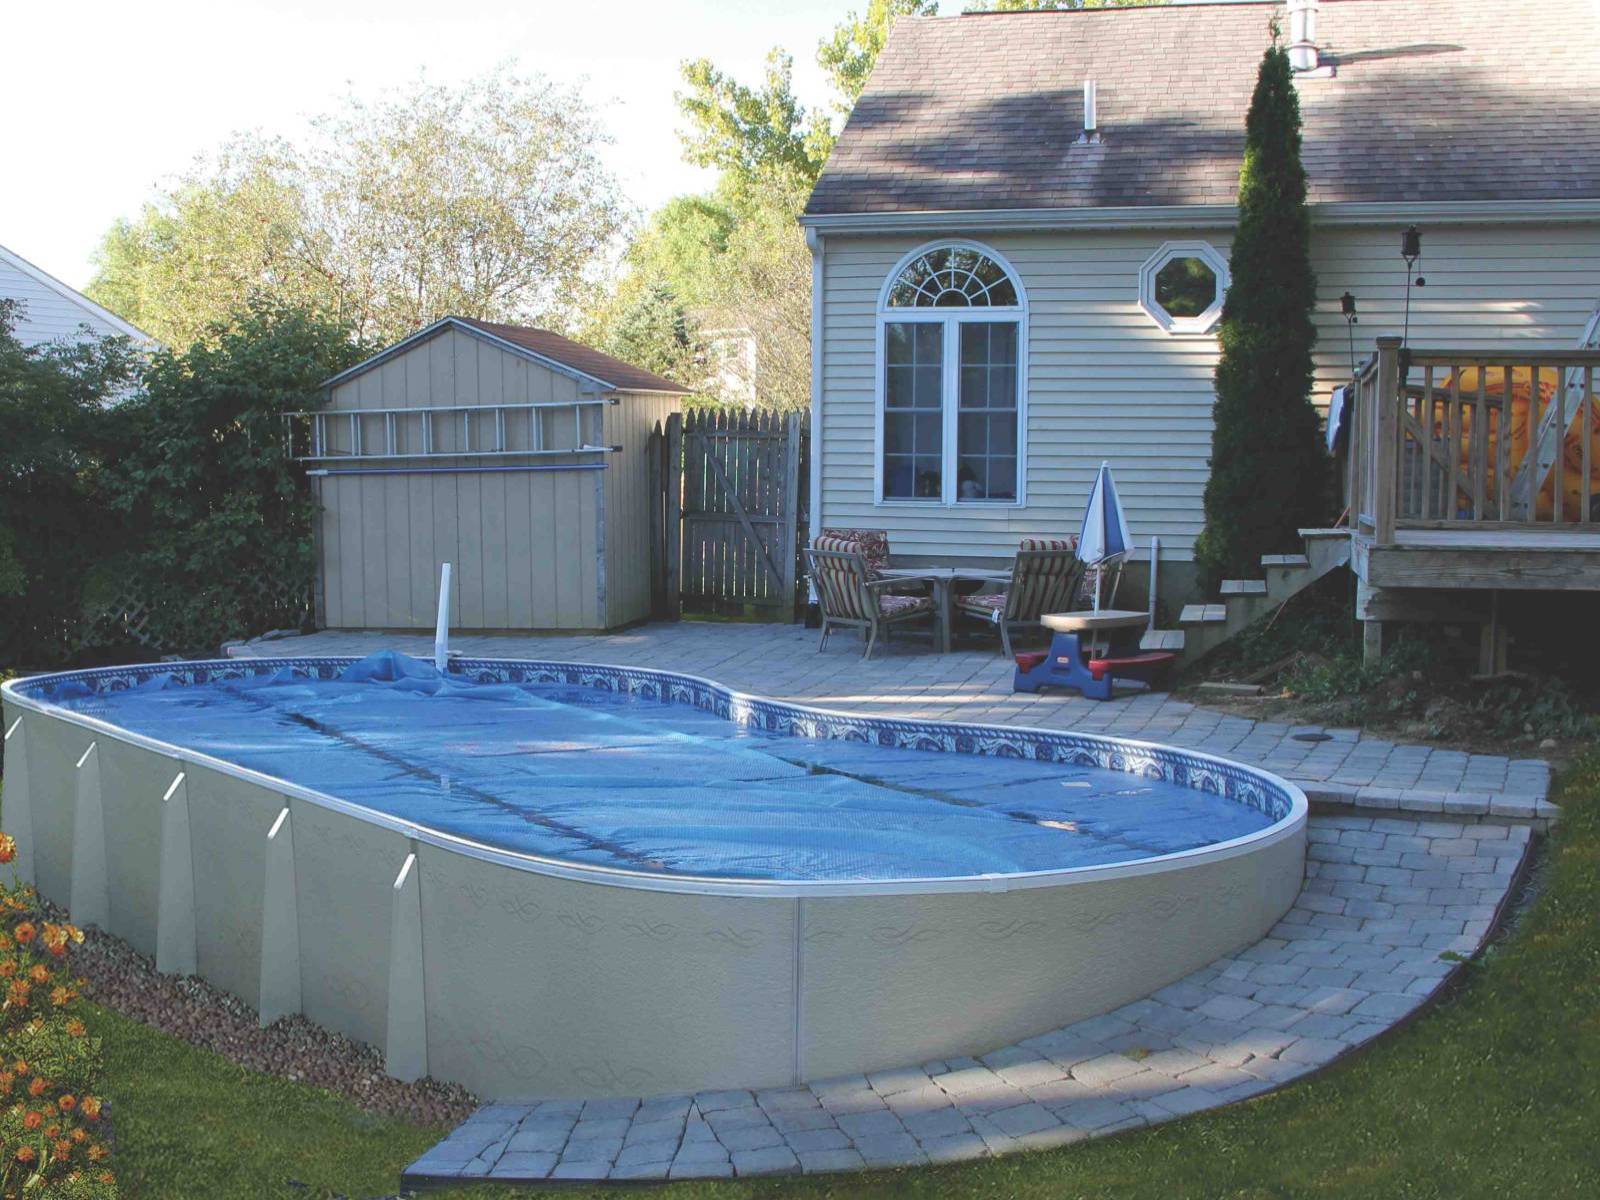 19 Amazing Above-Ground Swimming Pool Ideas – A Variety For Every Taste